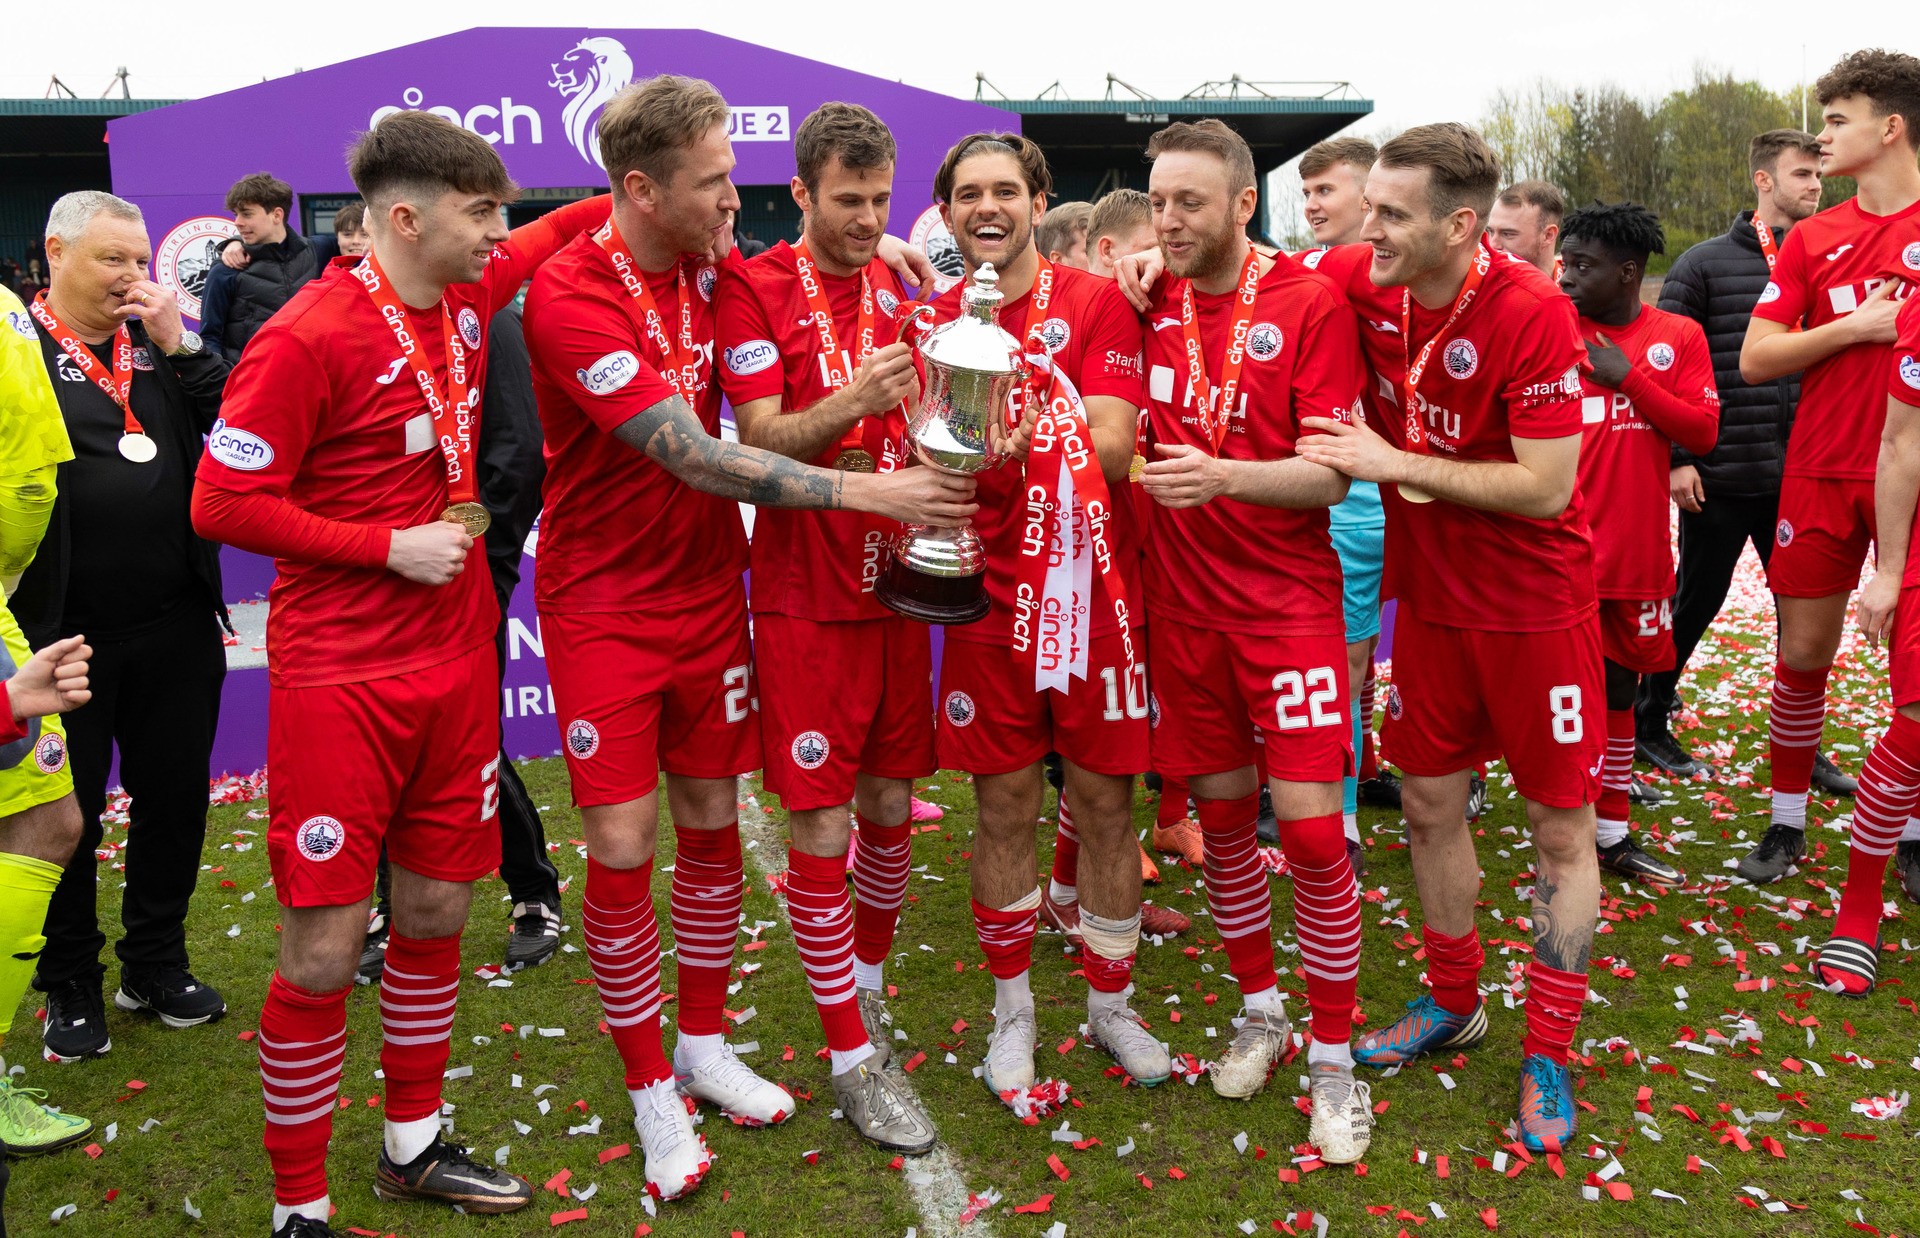 Stirling Albion won the League Two trophy after winning at Forfar. (Photo by Sammy Turner / SNS Group)